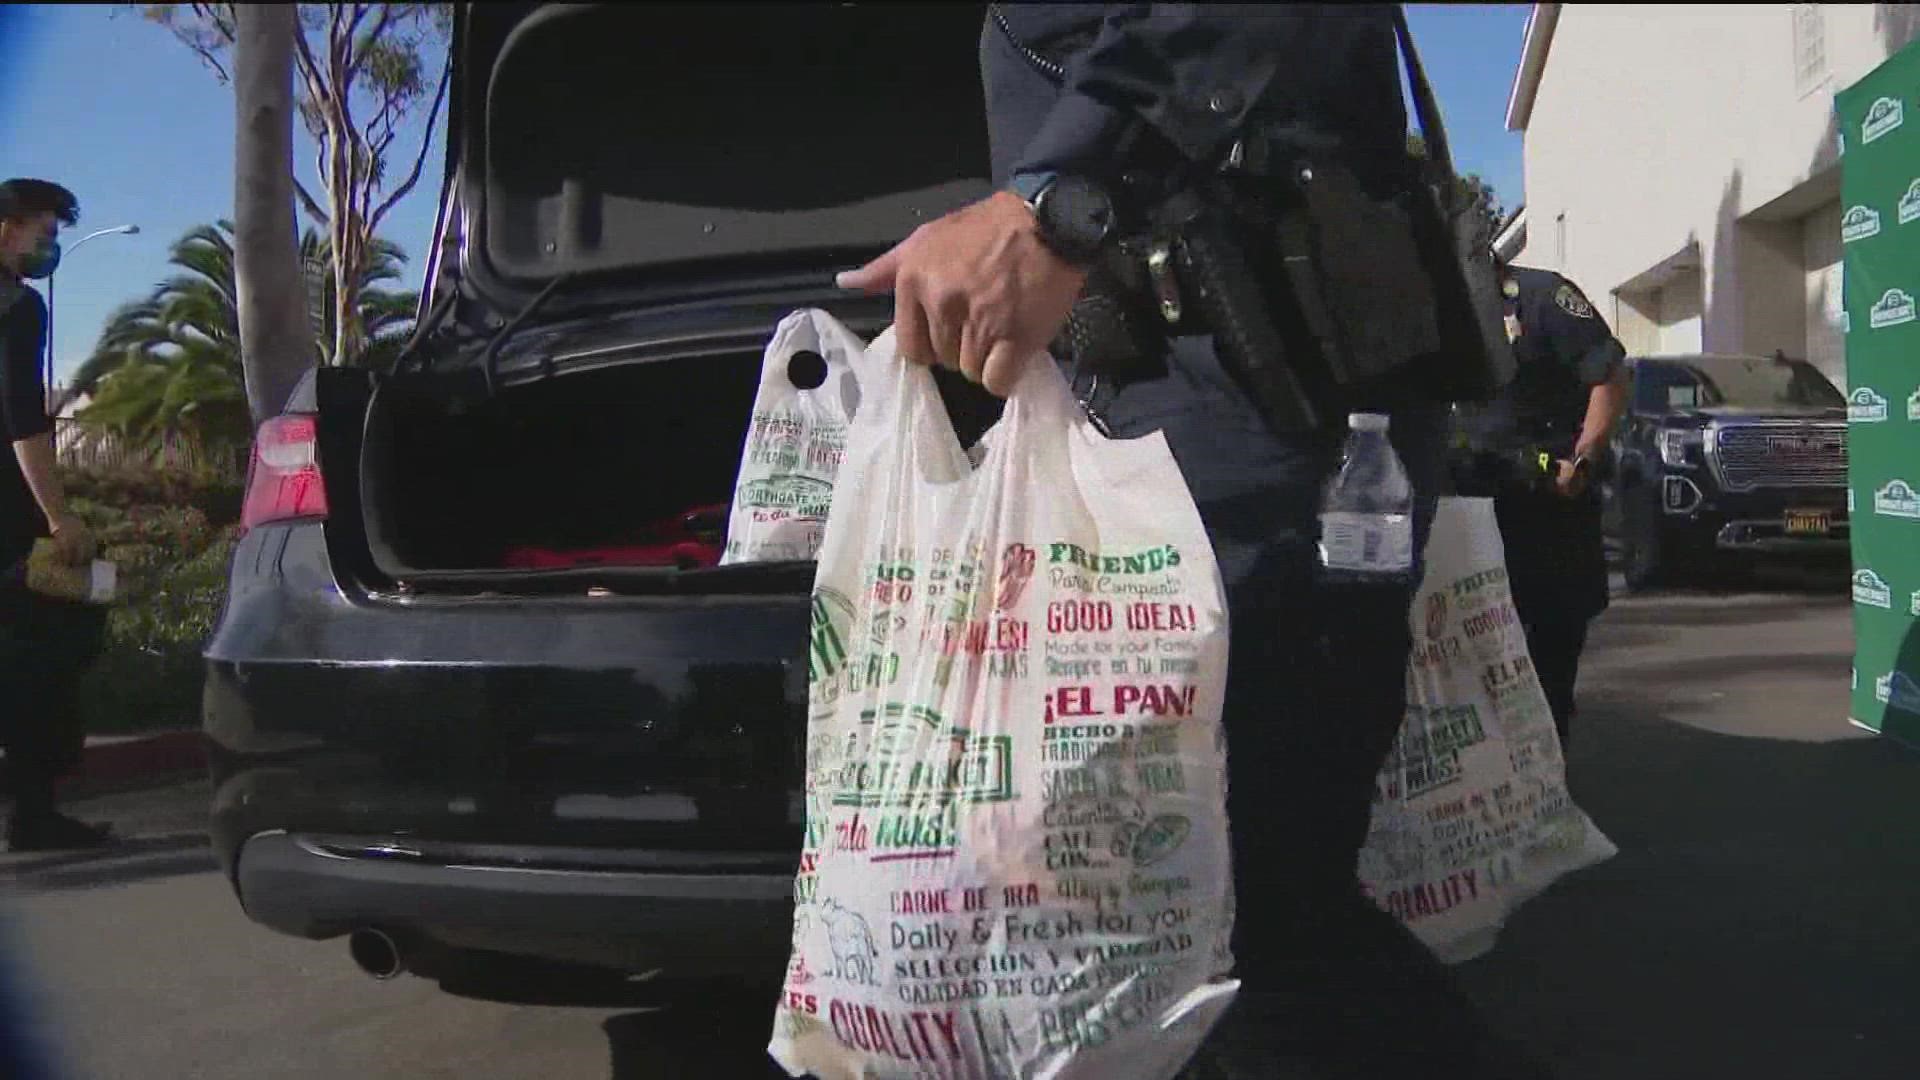 The California Highway Patrol is hosting its third annual Thanksgiving meal distribution event at Northgate Market.